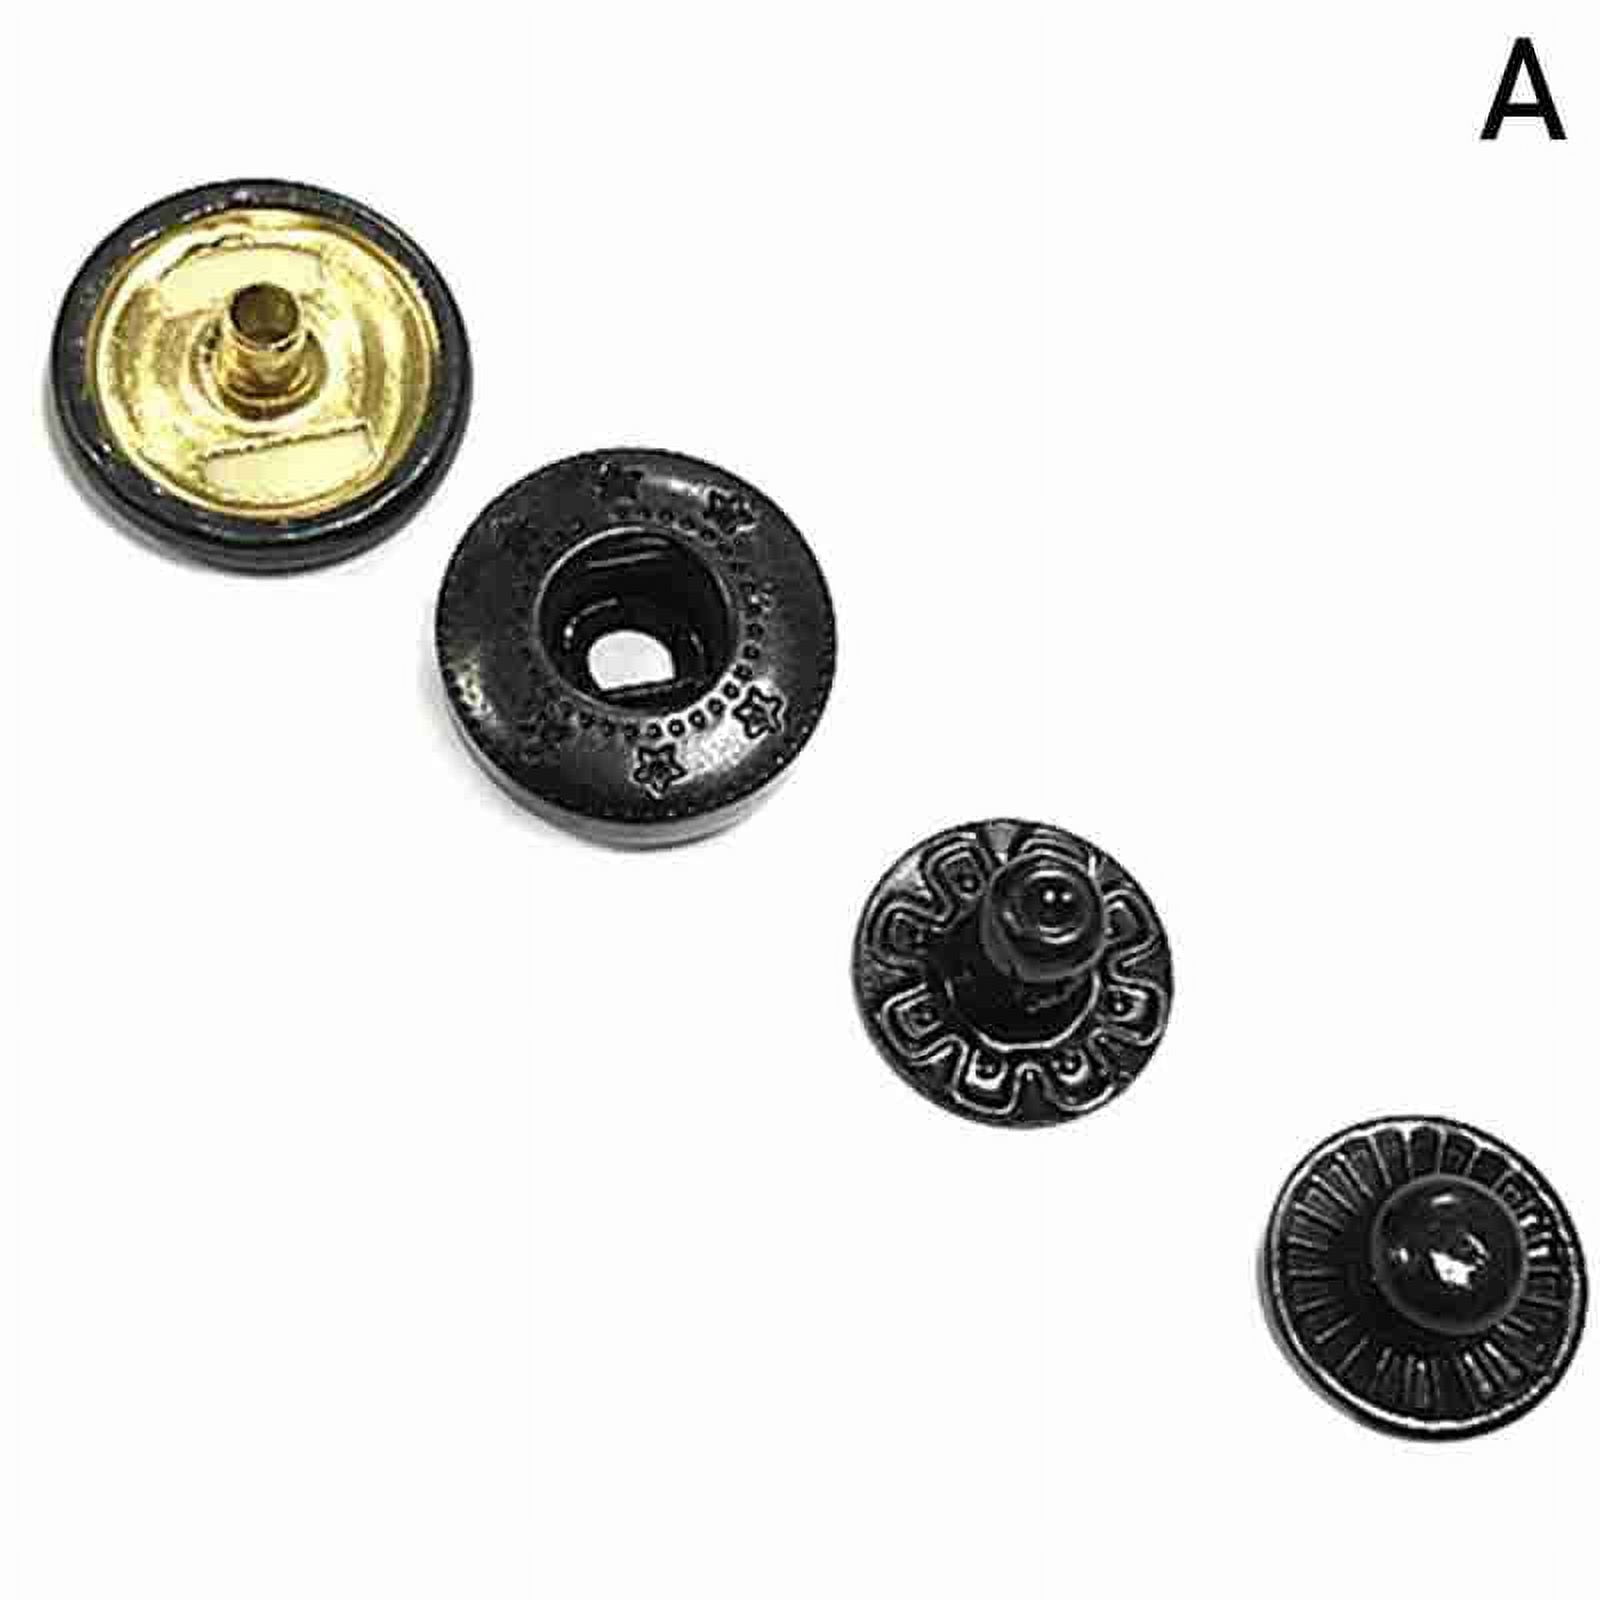 PACK of 5 Metal Cross Rivets Studs Leather Studs Leather Craft